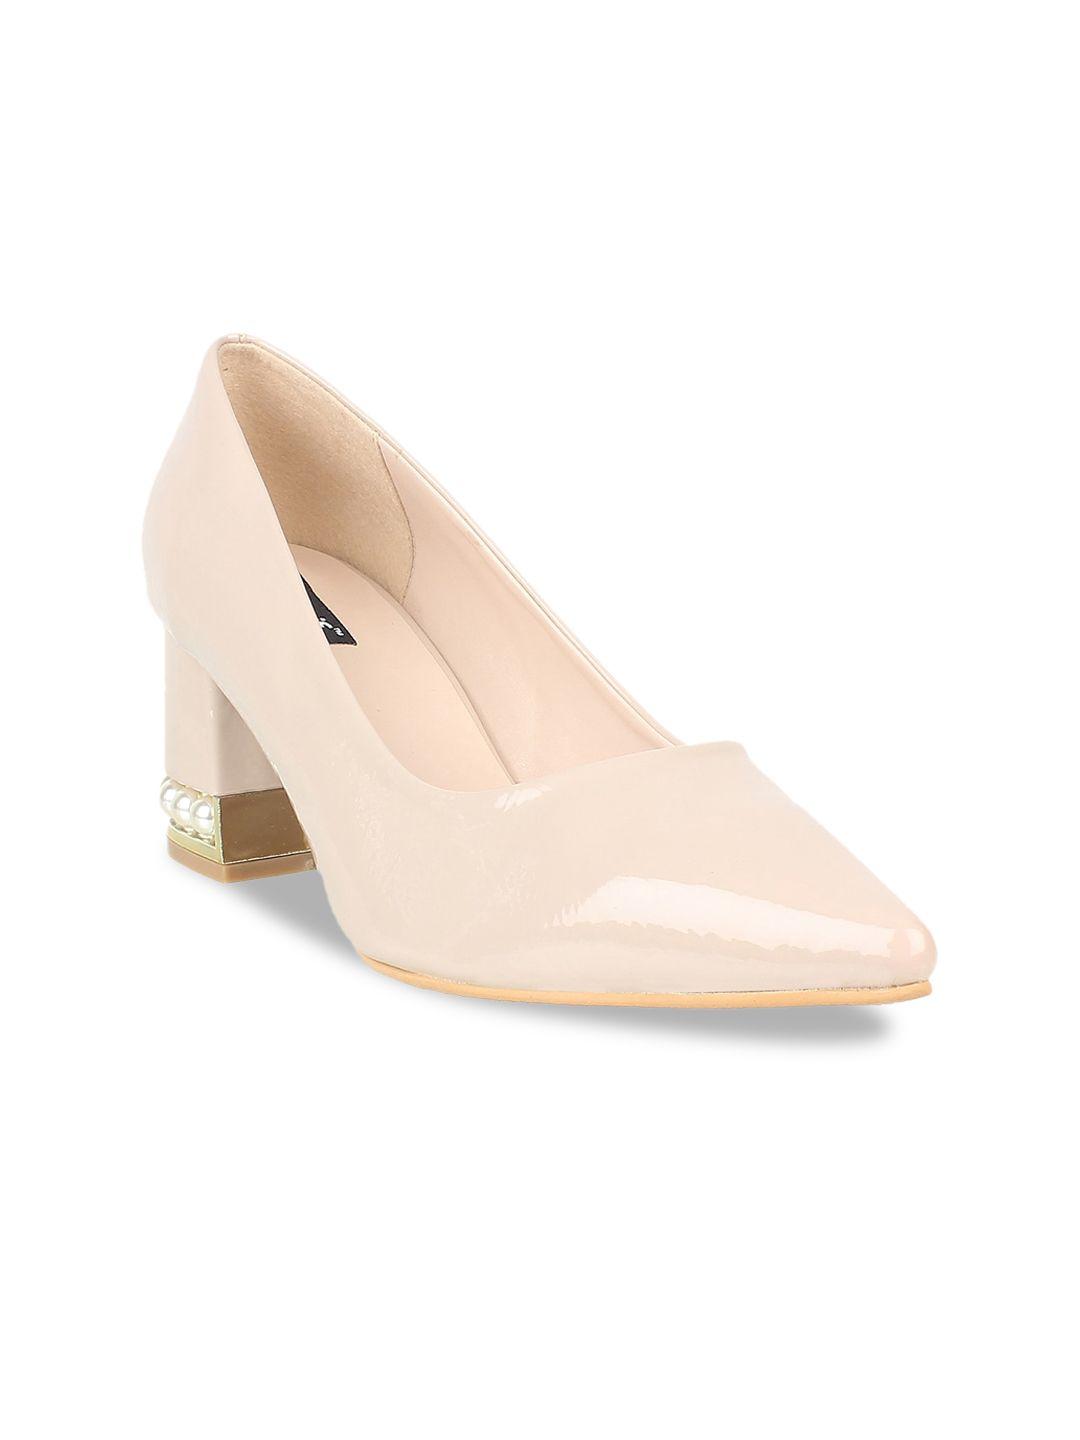 sherrif shoes women nude-coloured solid pumps